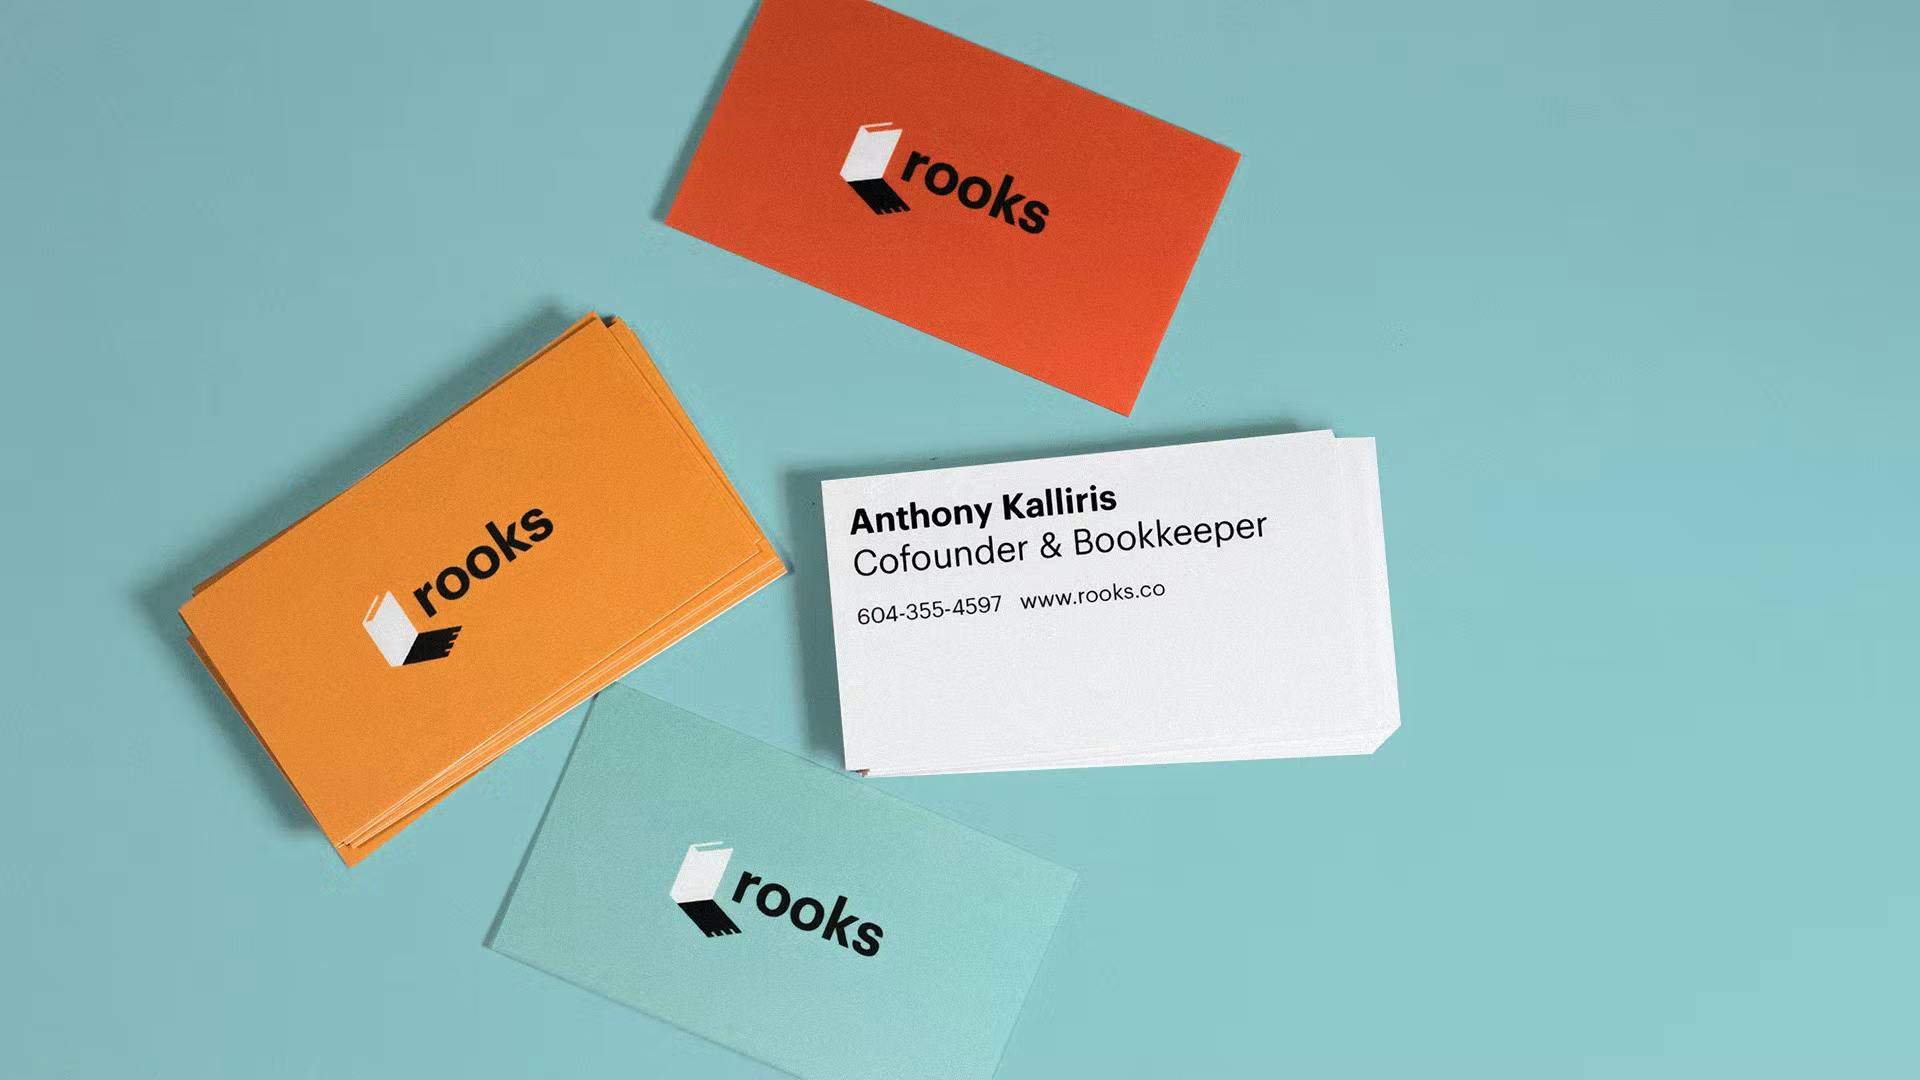 Rooks Bookkeeping business cards